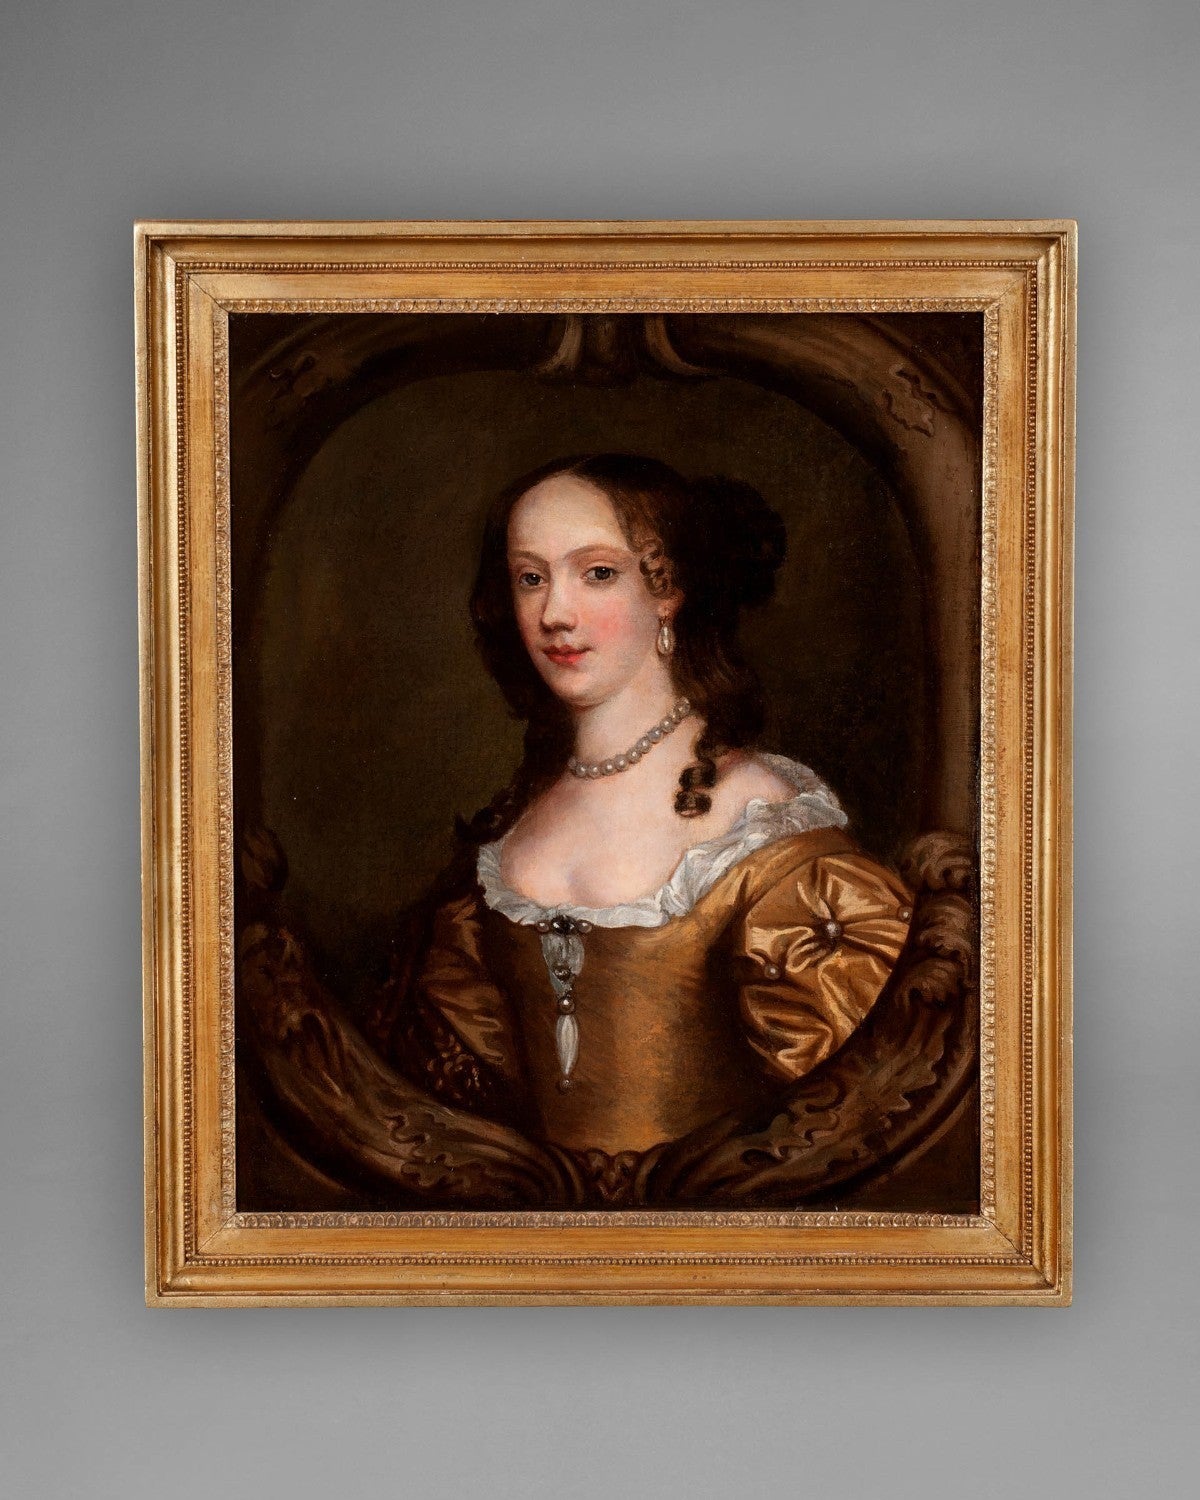 A very good late 17th-early 18th century oil on canvas portrait of a lady, inscribed verso “Lady Blake” in a giltwood frame. The style and composition of this portrait is strikingly similar to many of those painted by Sir Peter Lely, the Court